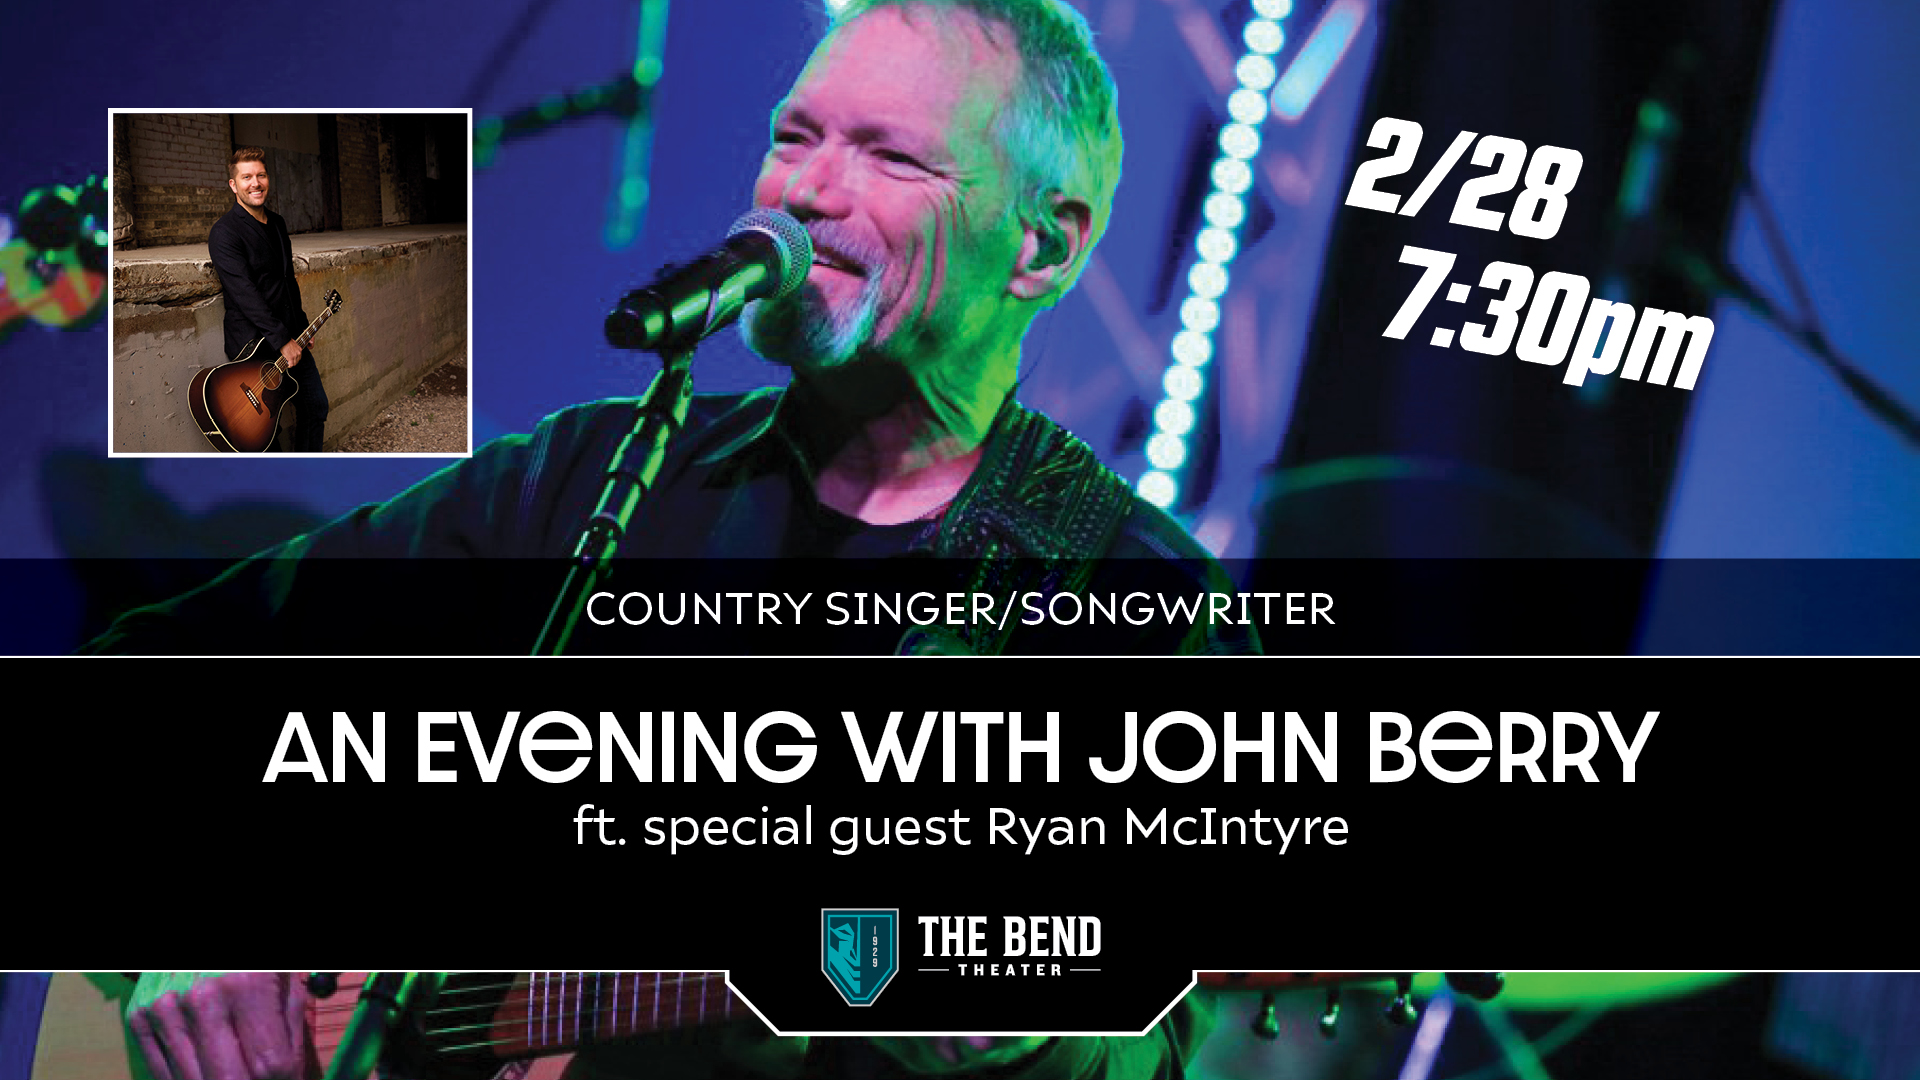 An Evening with John Berry ft. special guest Ryan McIntyre